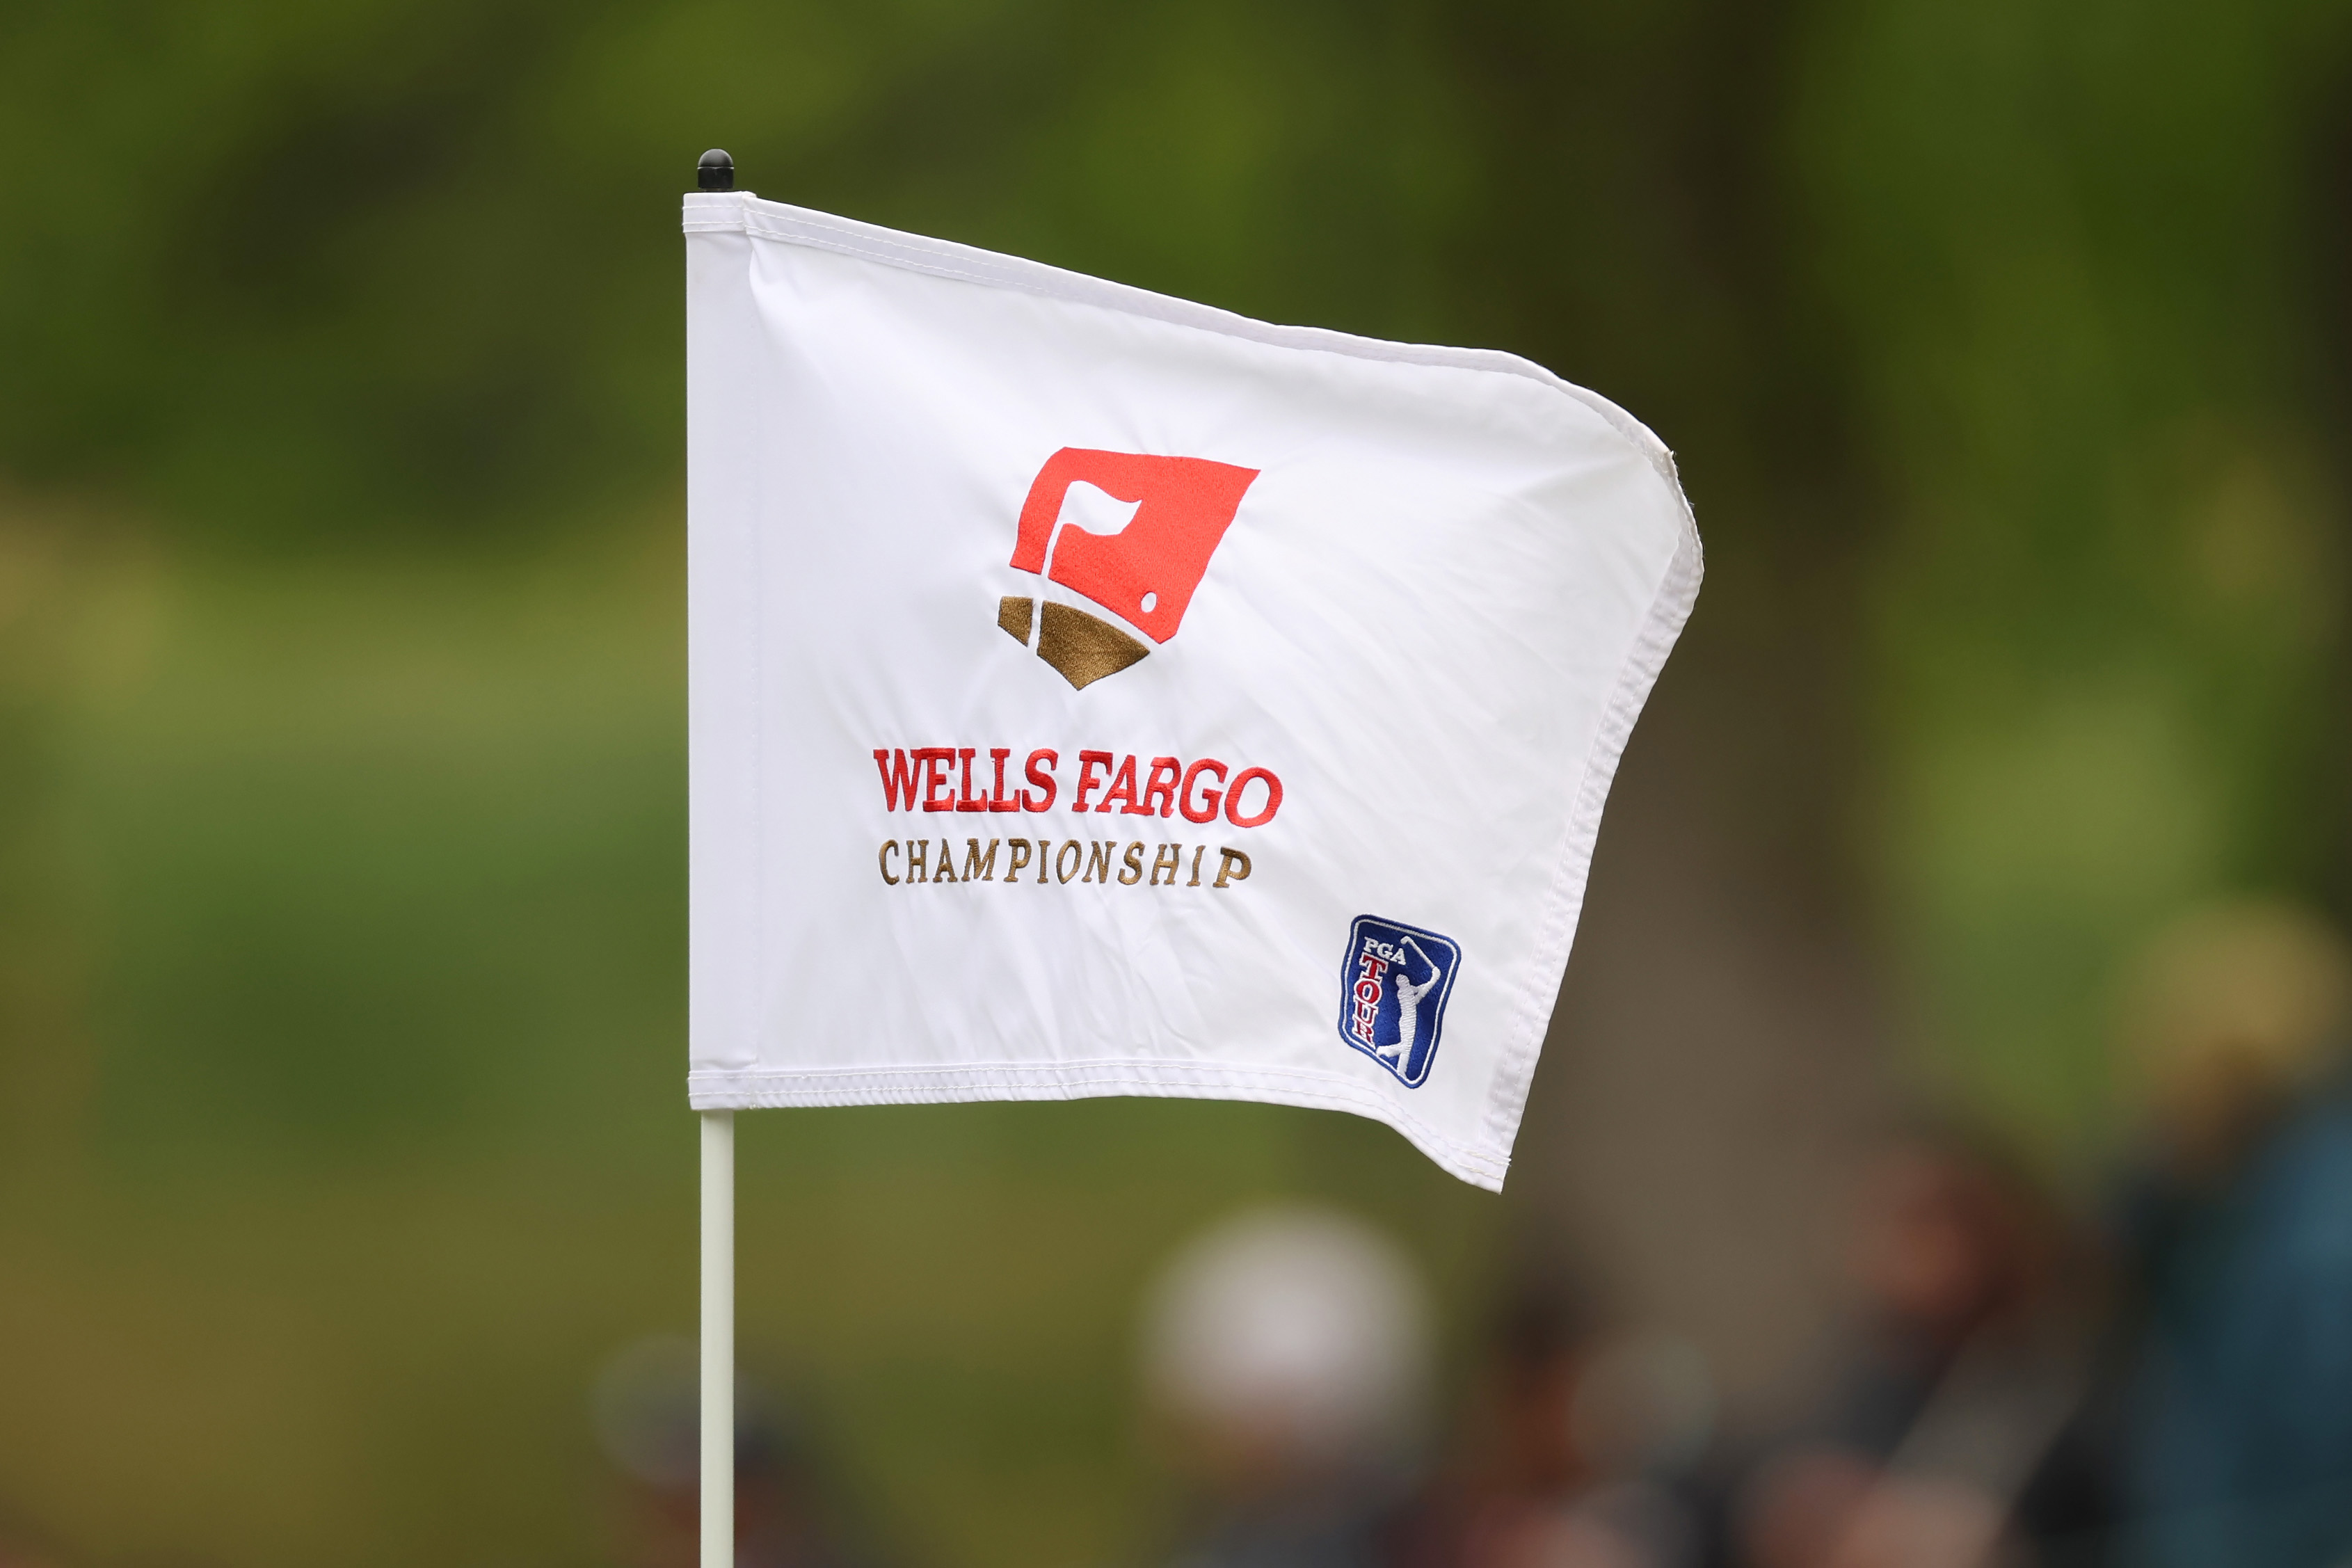 Prize money payout for each player at the 2022 Wells Fargo Championship